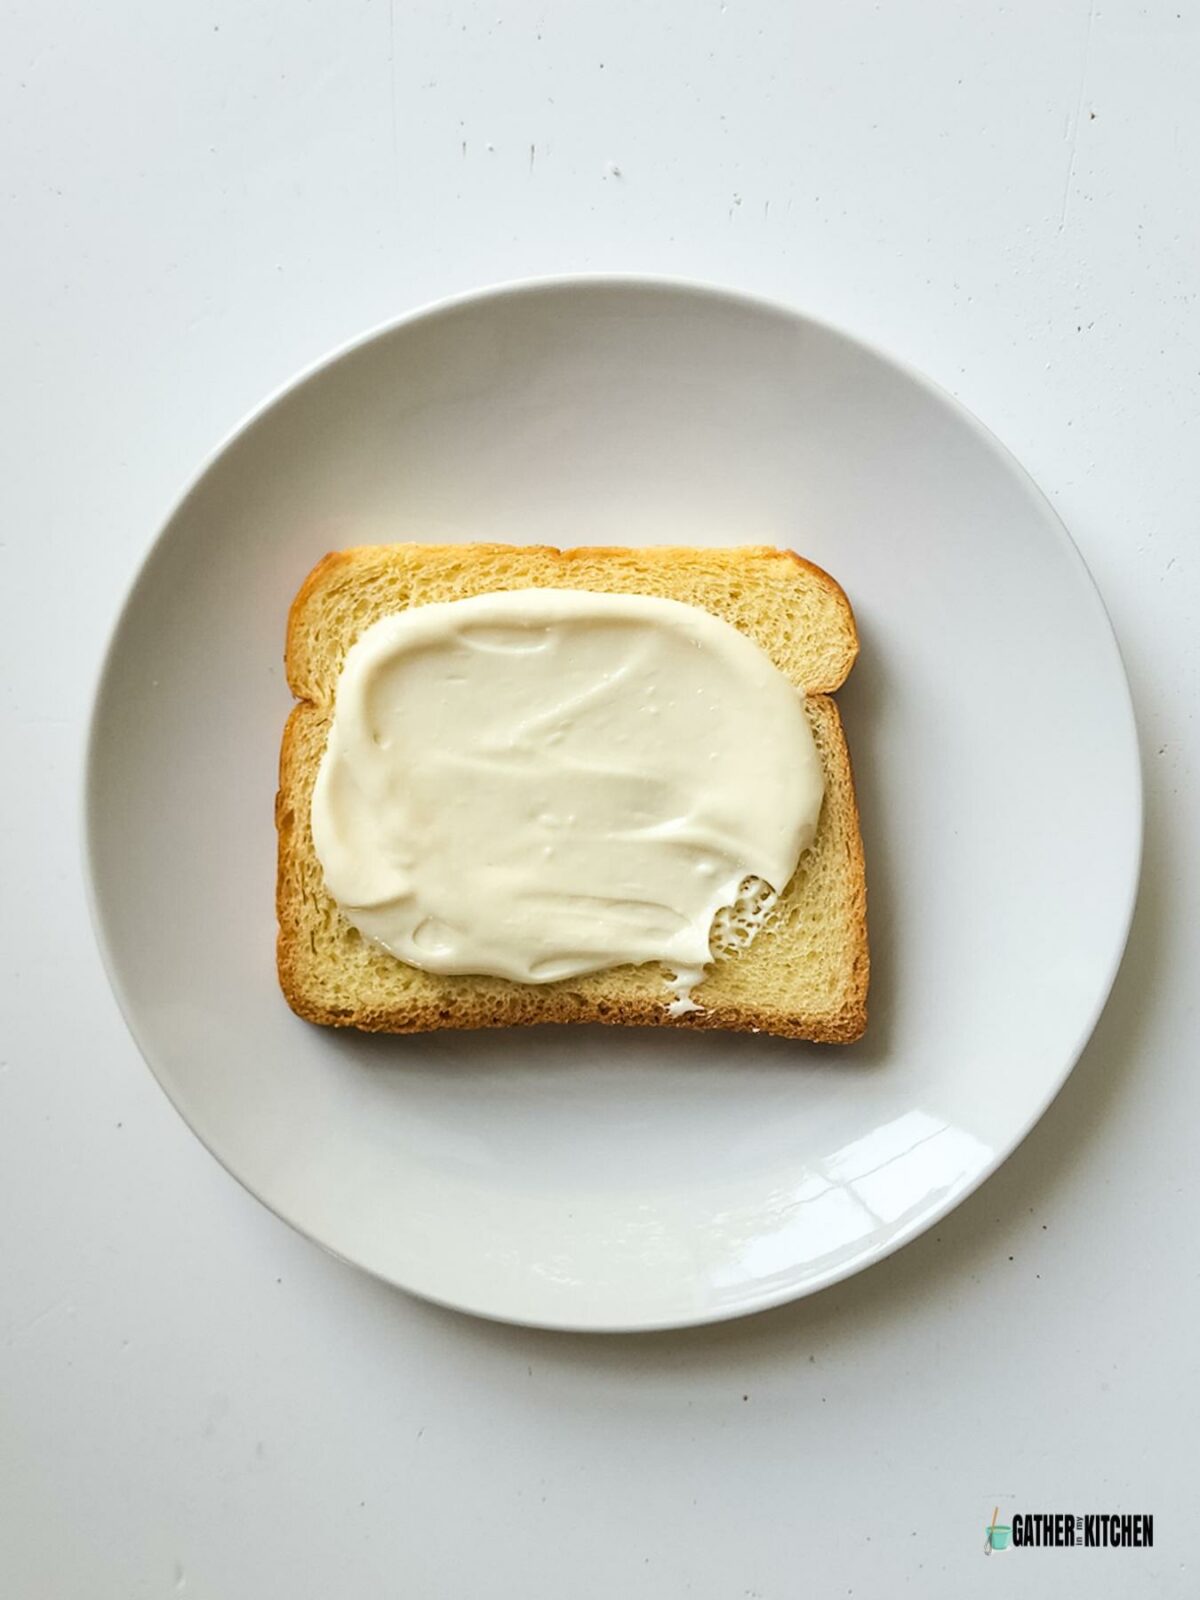 A piece of bread with cream cheese spread on it.